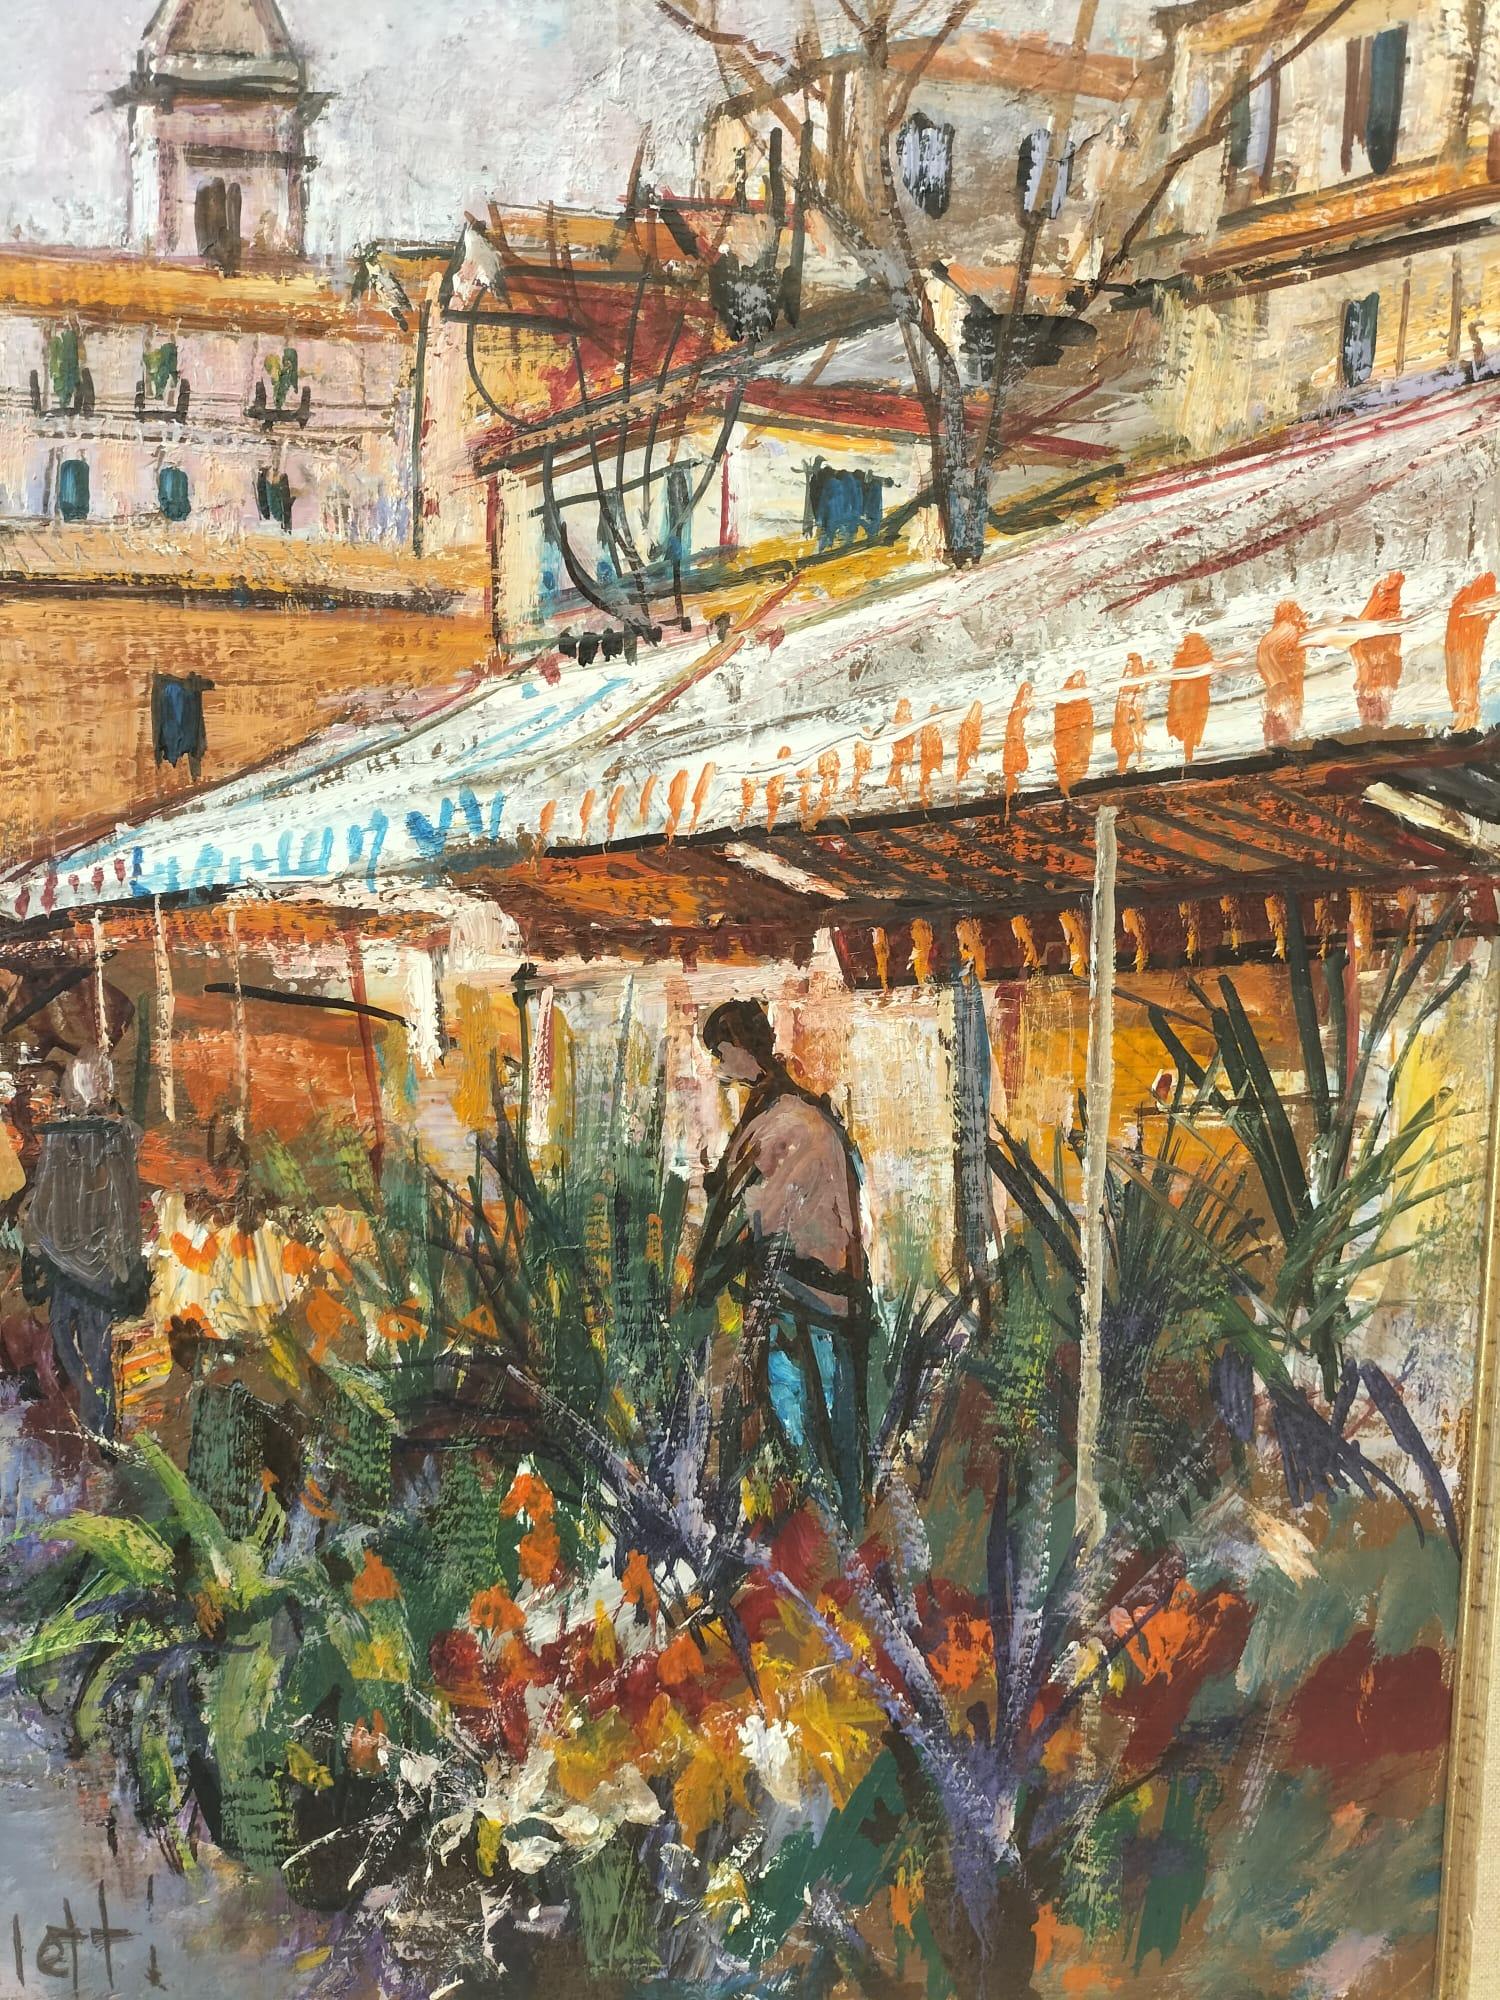 We are delighted to present this exquisite painting by Cesar Boletti (1915-1995), which captures a vibrant floral market scene on the Cours Saleya in Nice. This piece is masterfully rendered using a refined painting technique and a stunning palette